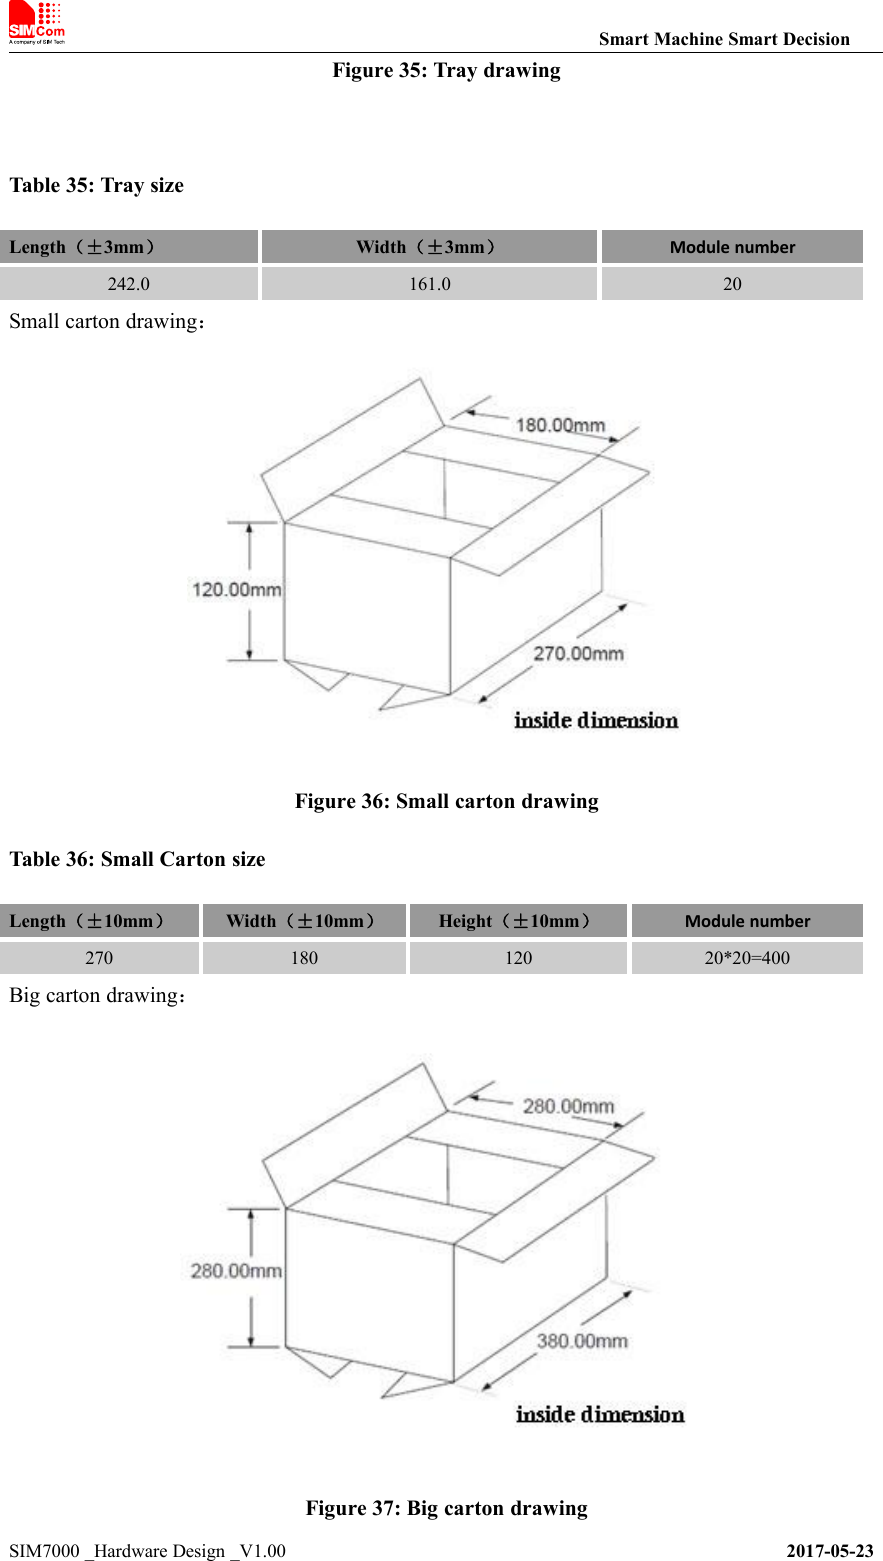 Smart Machine Smart DecisionSIM7000 _Hardware Design _V1.00 2017-05-23Figure 35: Tray drawingTable 35: Tray sizeLength（±3mm）Width（±3mm）Module number242.0161.020Small carton drawing：Figure 36: Small carton drawingTable 36: Small Carton sizeLength（±10mm）Width（±10mm）Height（±10mm）Module number27018012020*20=400Big carton drawing：Figure 37: Big carton drawing